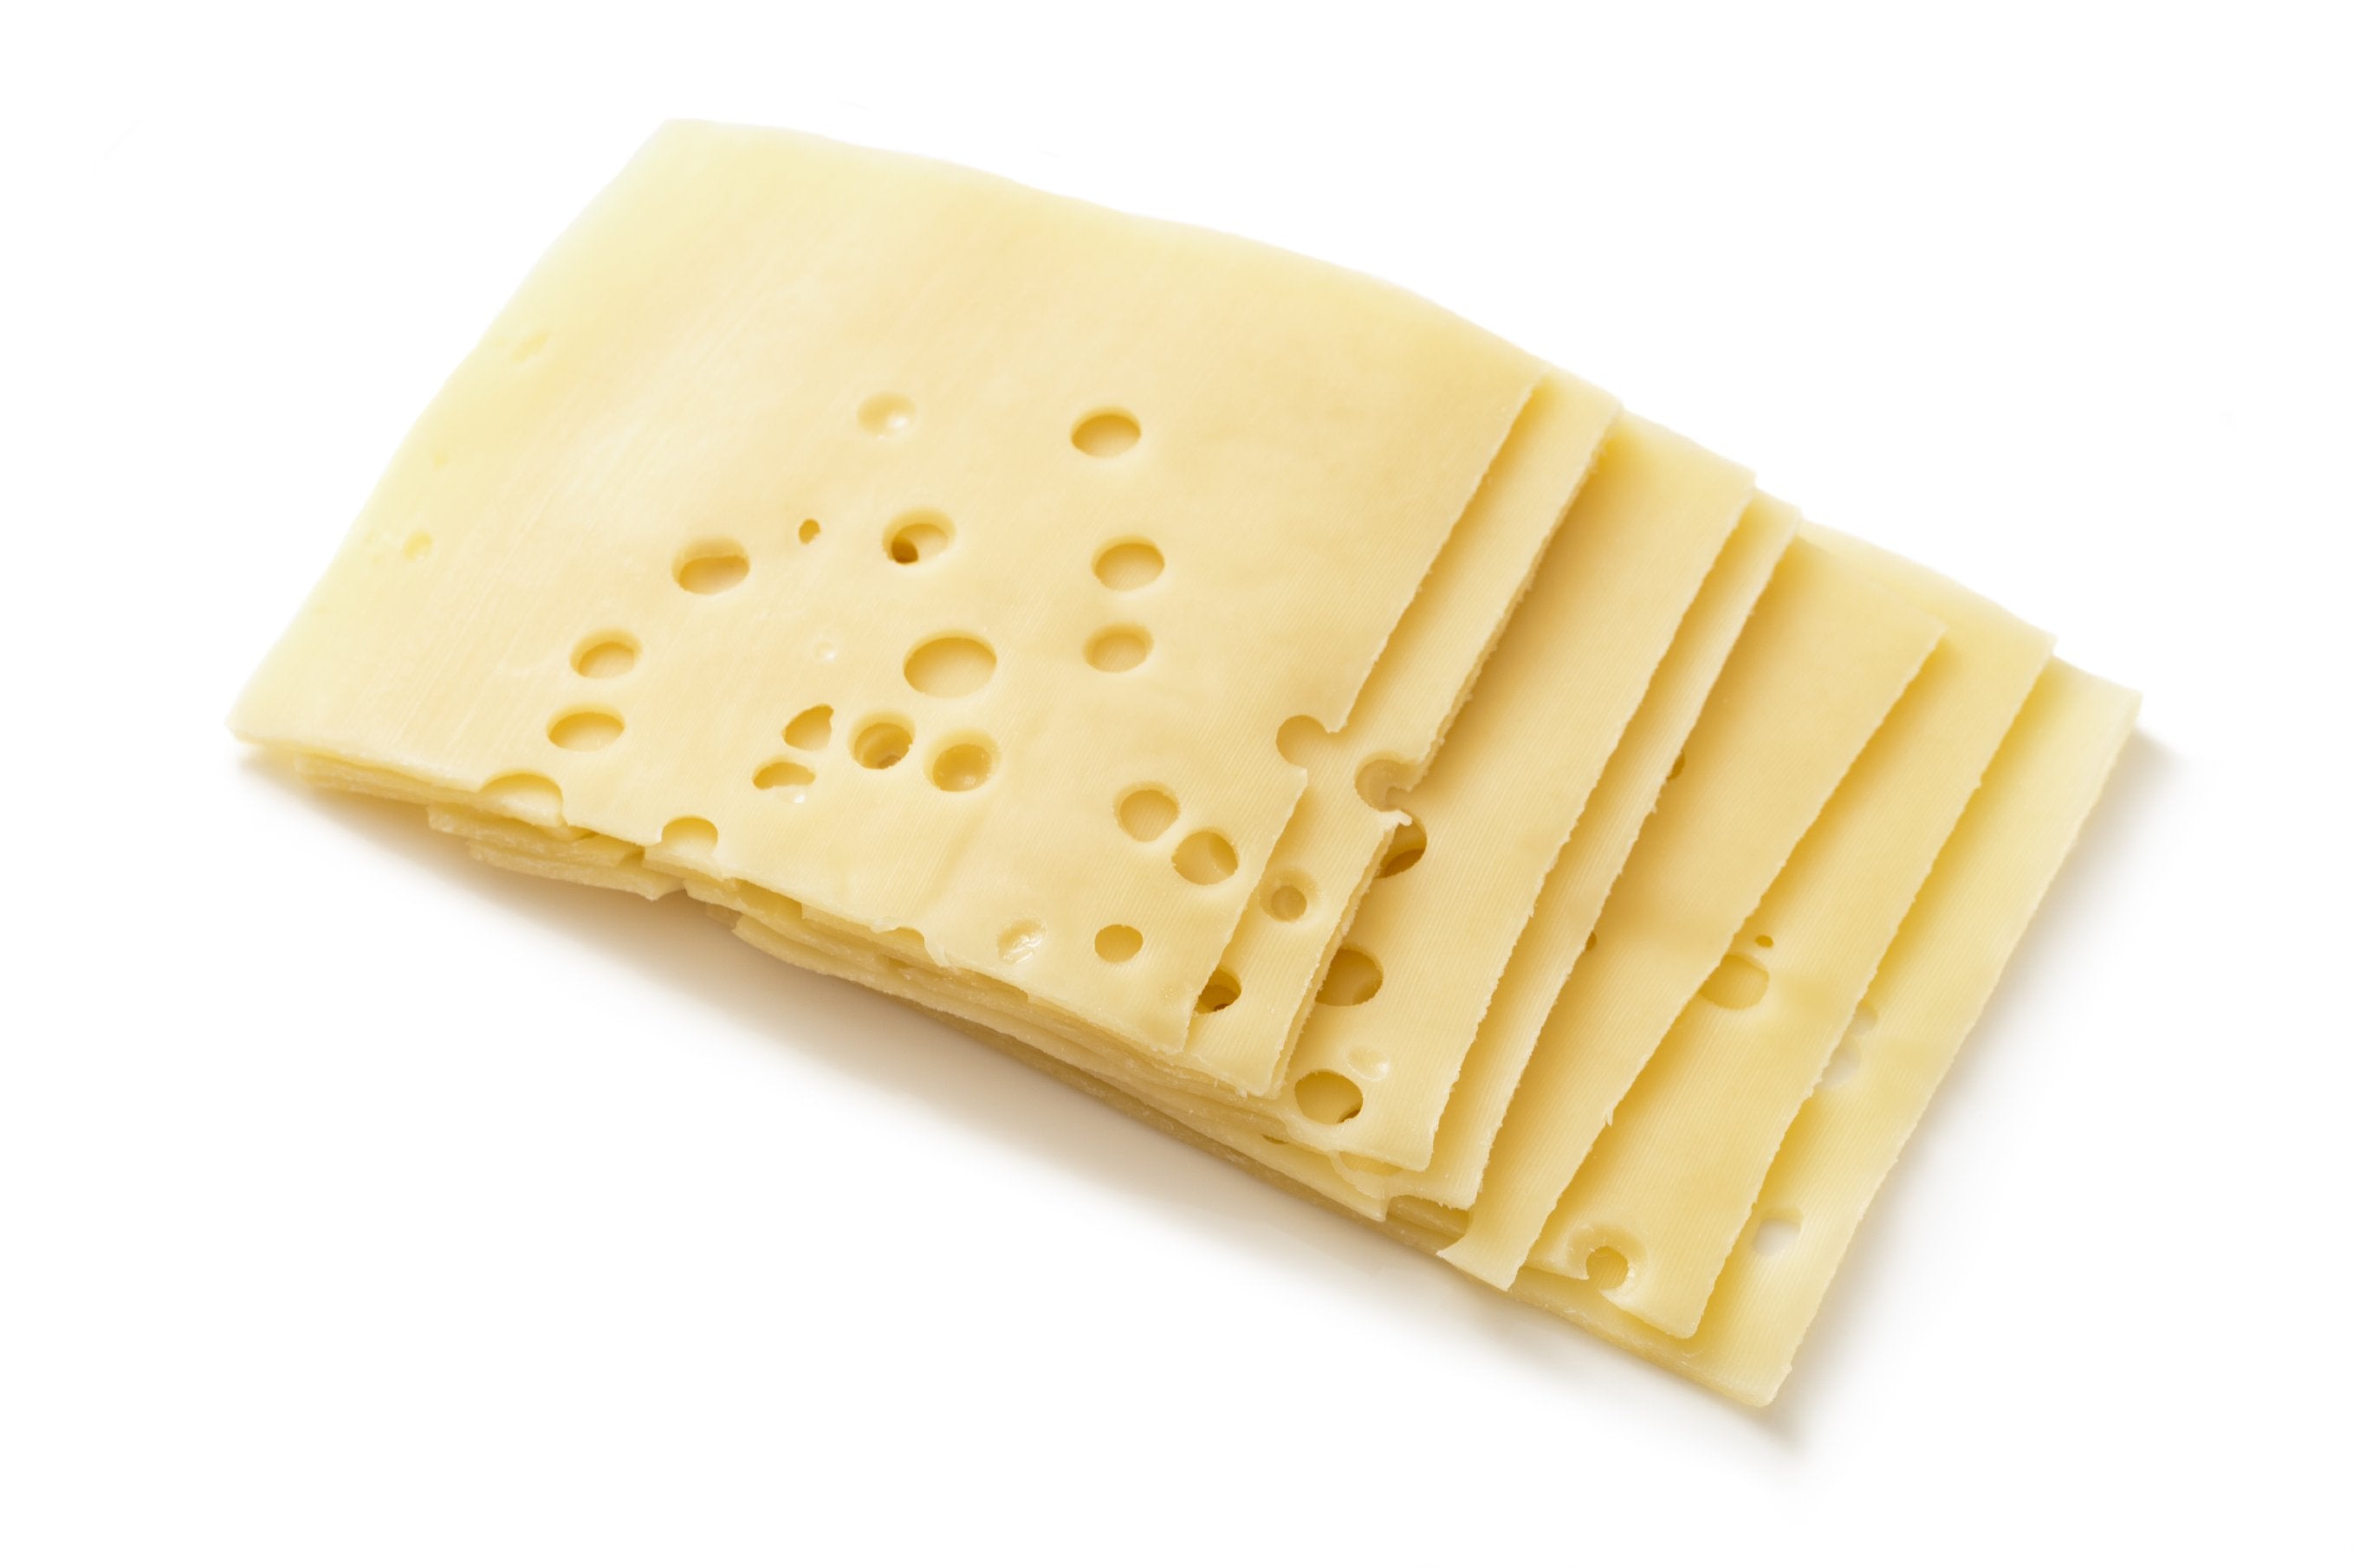 Swiss Cheese Slices